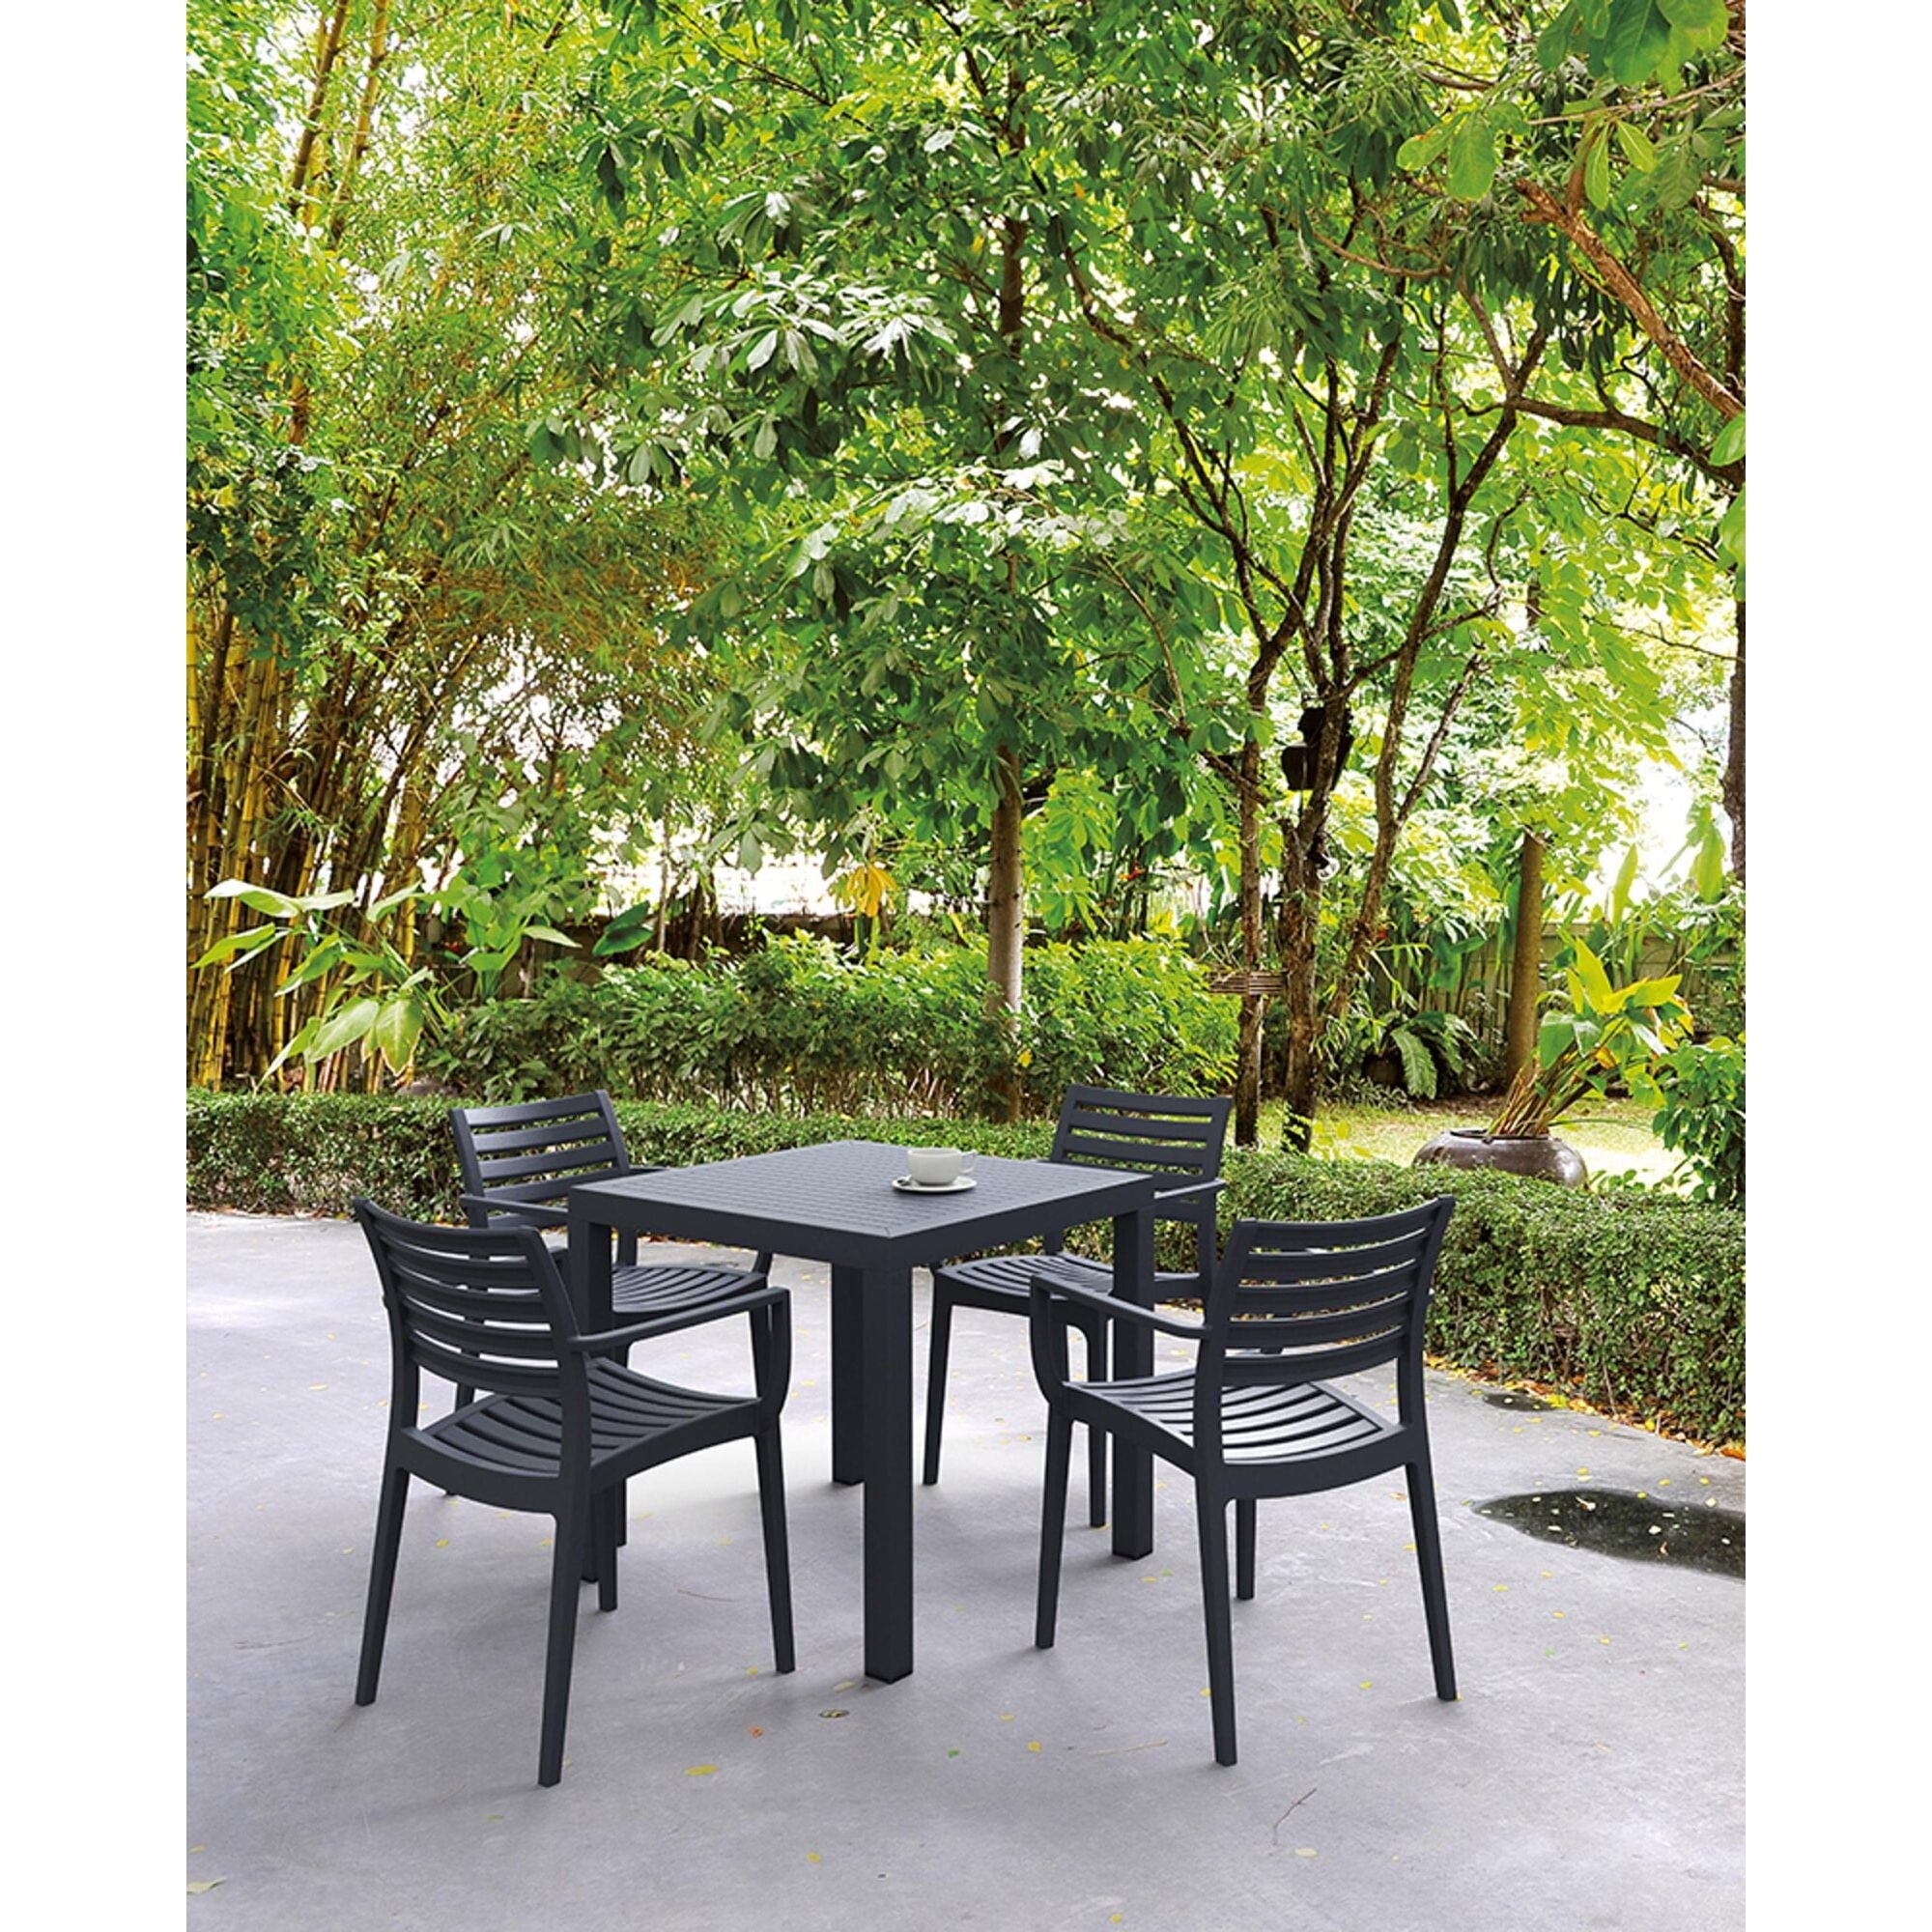 Garbar Arctic Square table indoors, outdoors 80x80 black